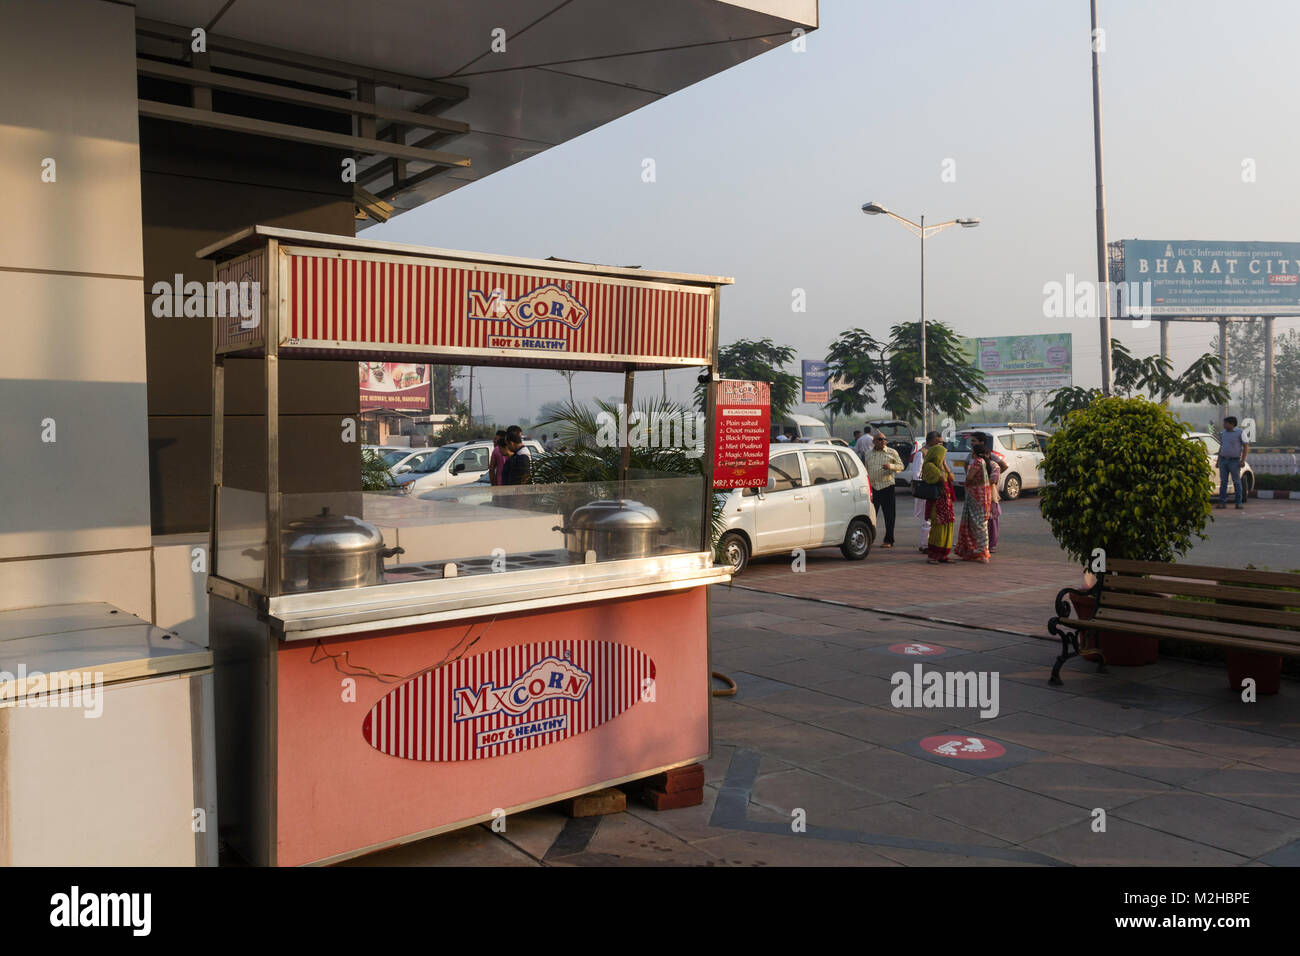 A counter inside the Namaste Midway food court on the Delhi Hardwar highway, near Muzaffarnagar. It is still early and the counter is not yet active.  Stock Photo